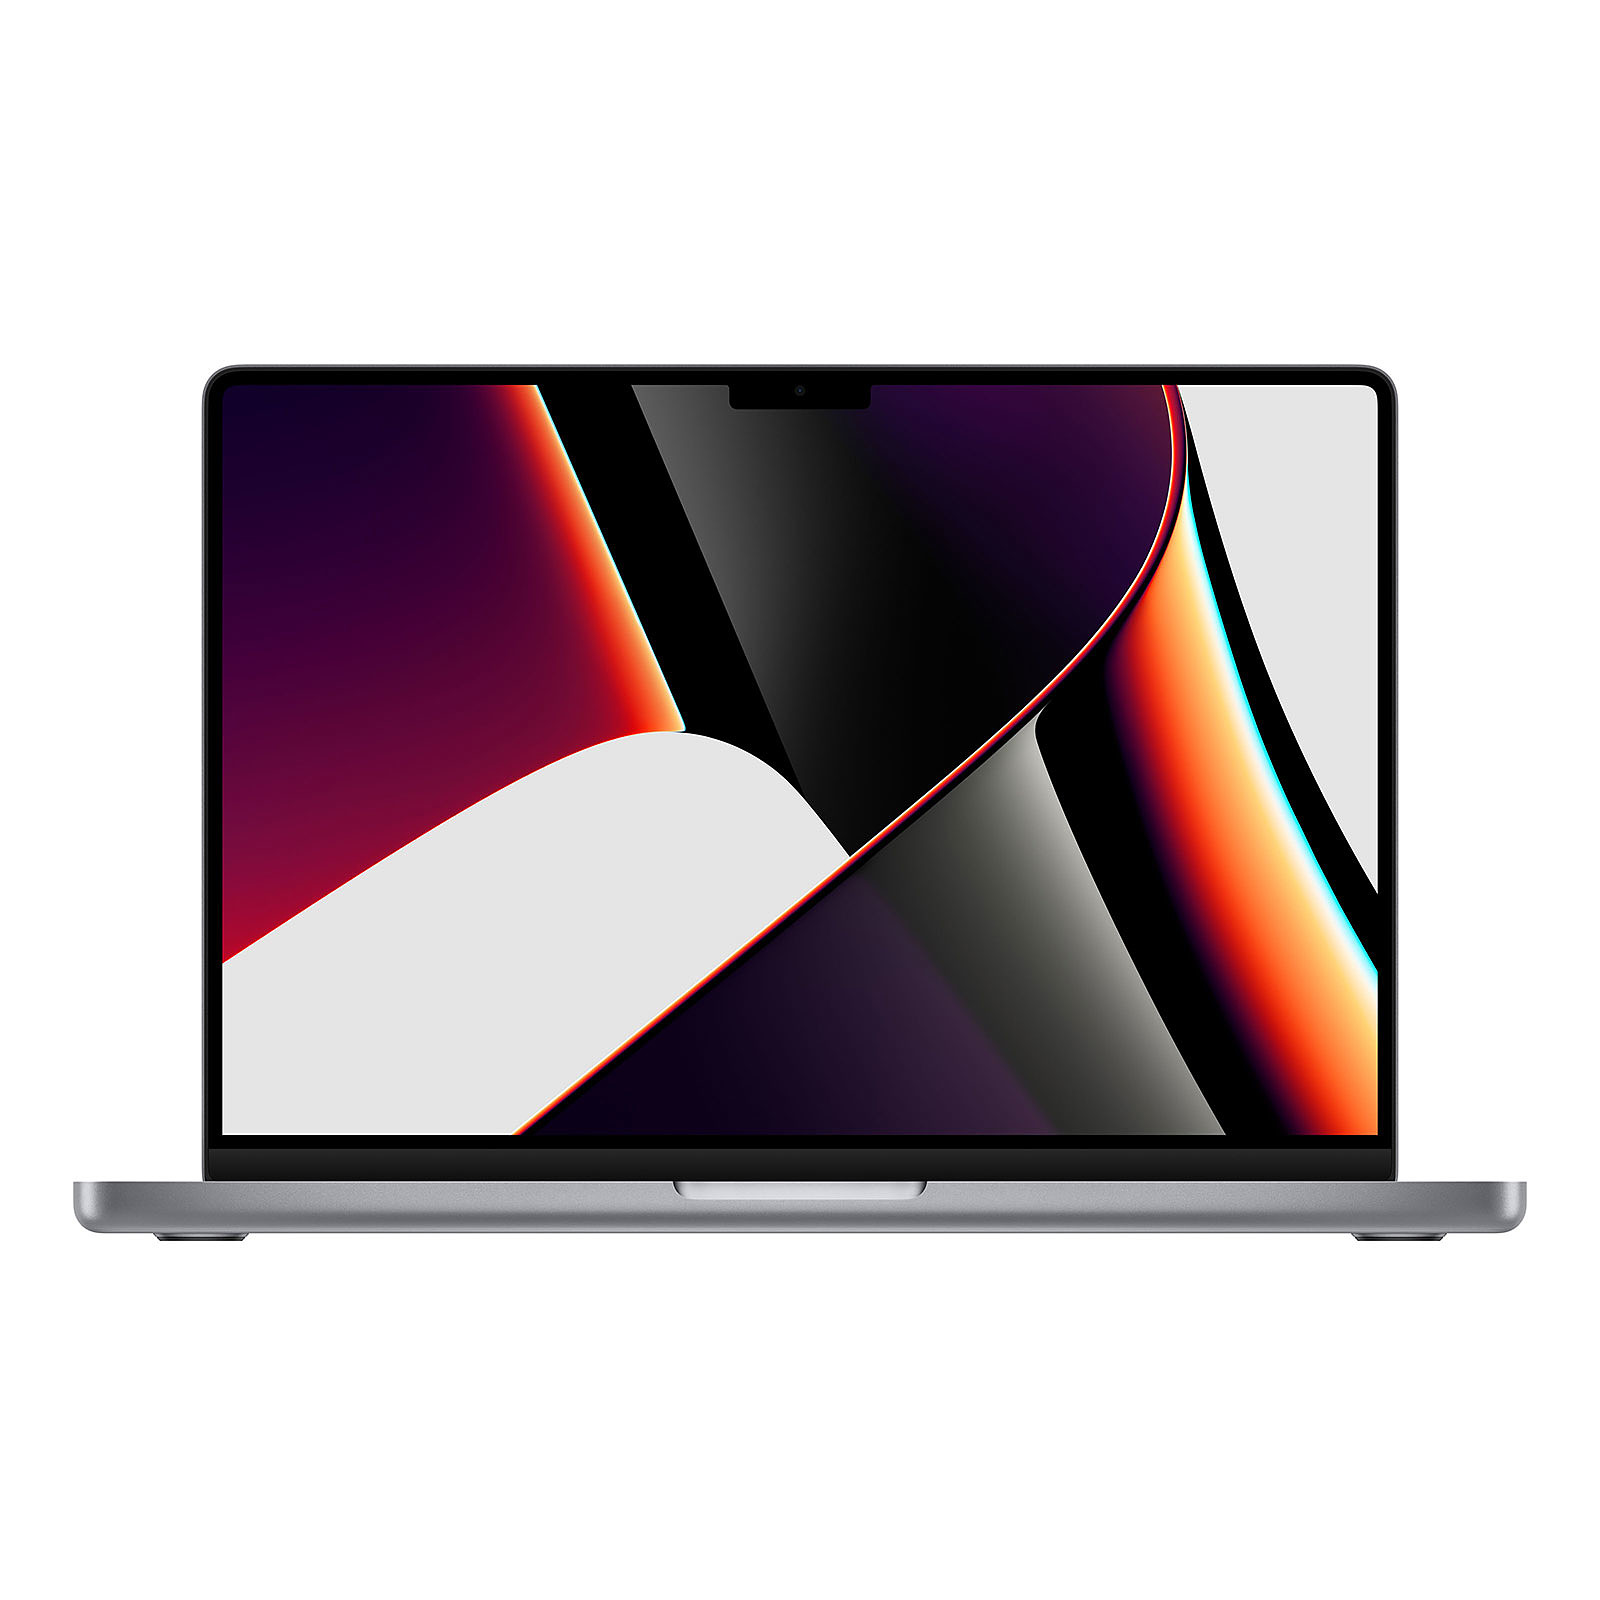 Apple MacBook Pro M1 Pro (2021) 14" Gris sideral 16Go/1To (MKGQ3FN/A) - MacBook Apple